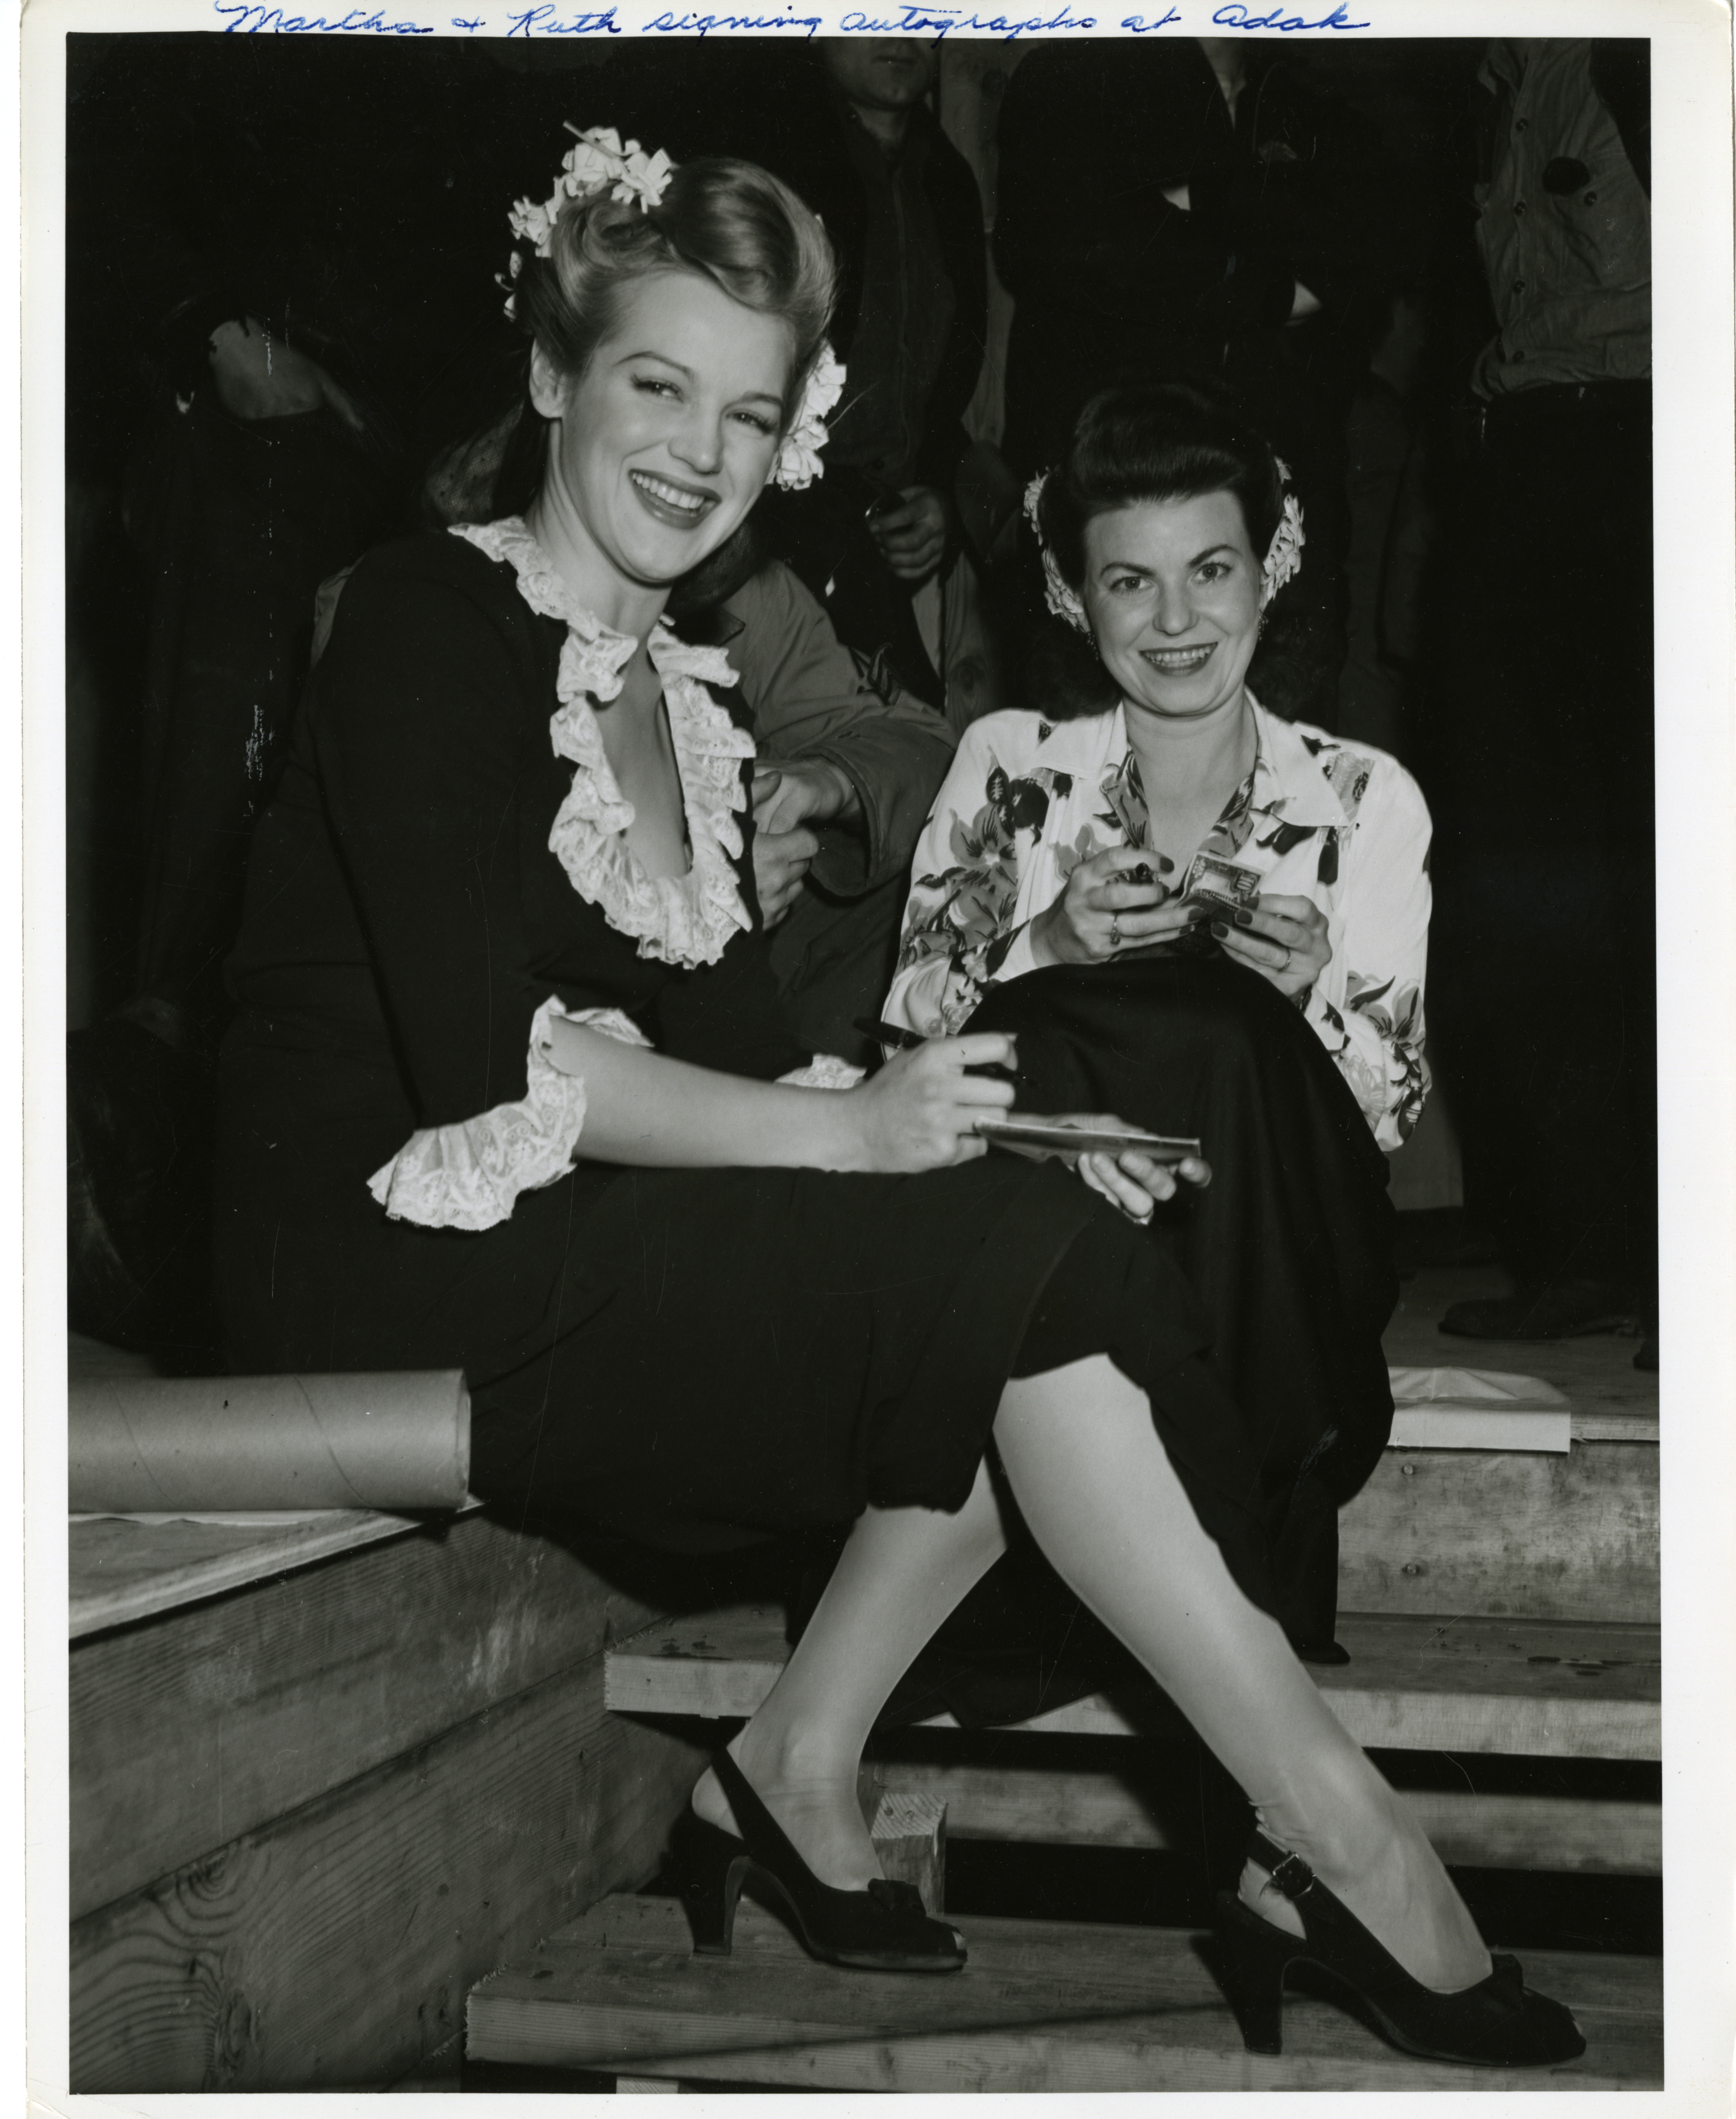 Martha And Ruth Sign Autographs Alaska December 1943 The Digital Collections Of The National